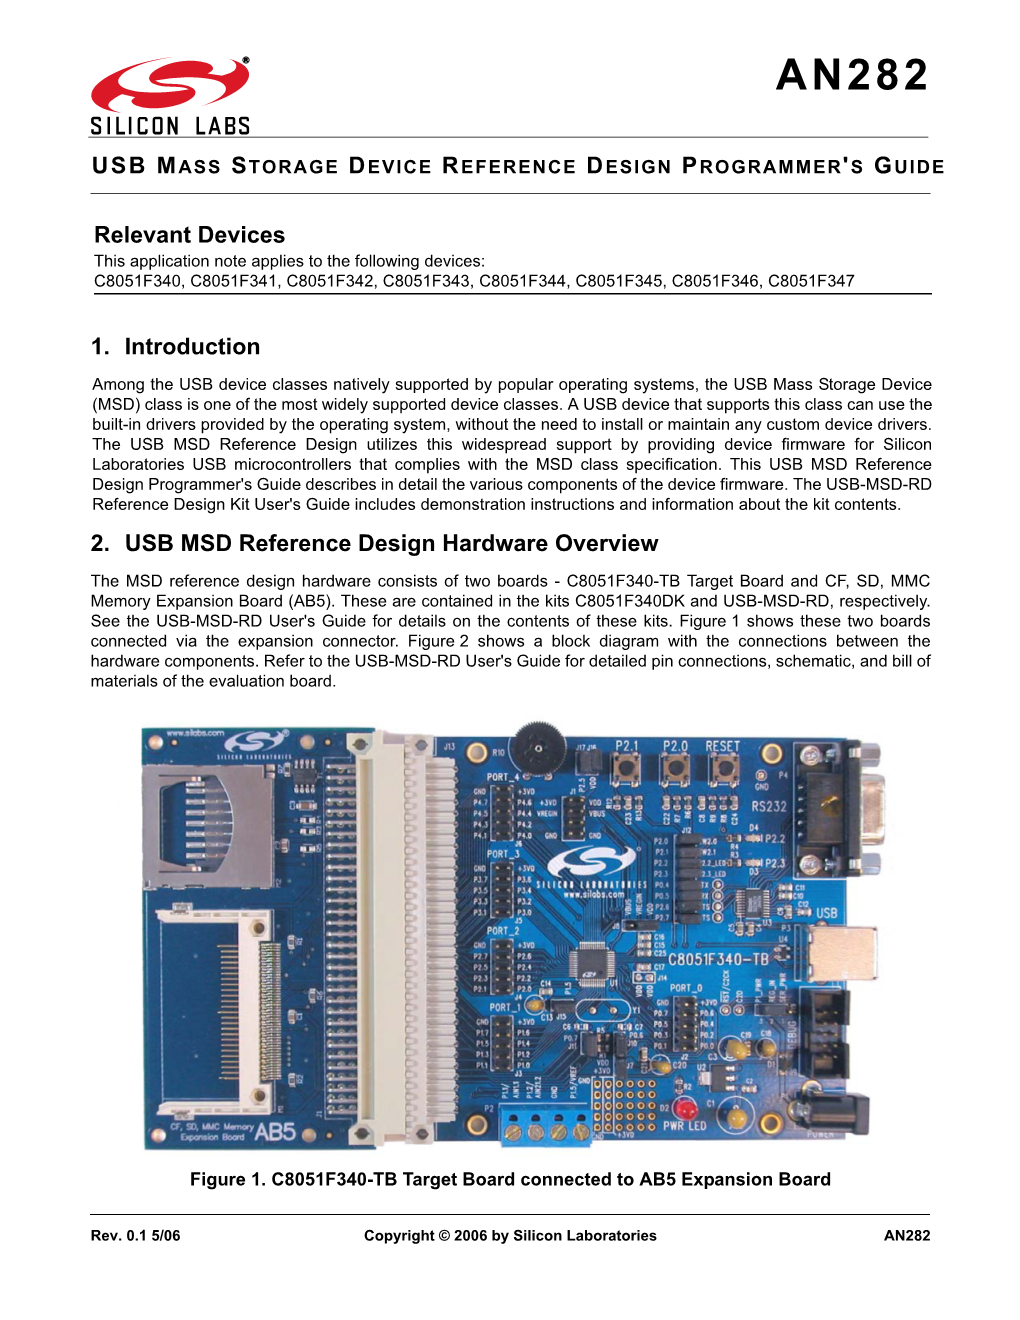 AN282: USB Mass Storage Device Reference Design Programmer's Guide